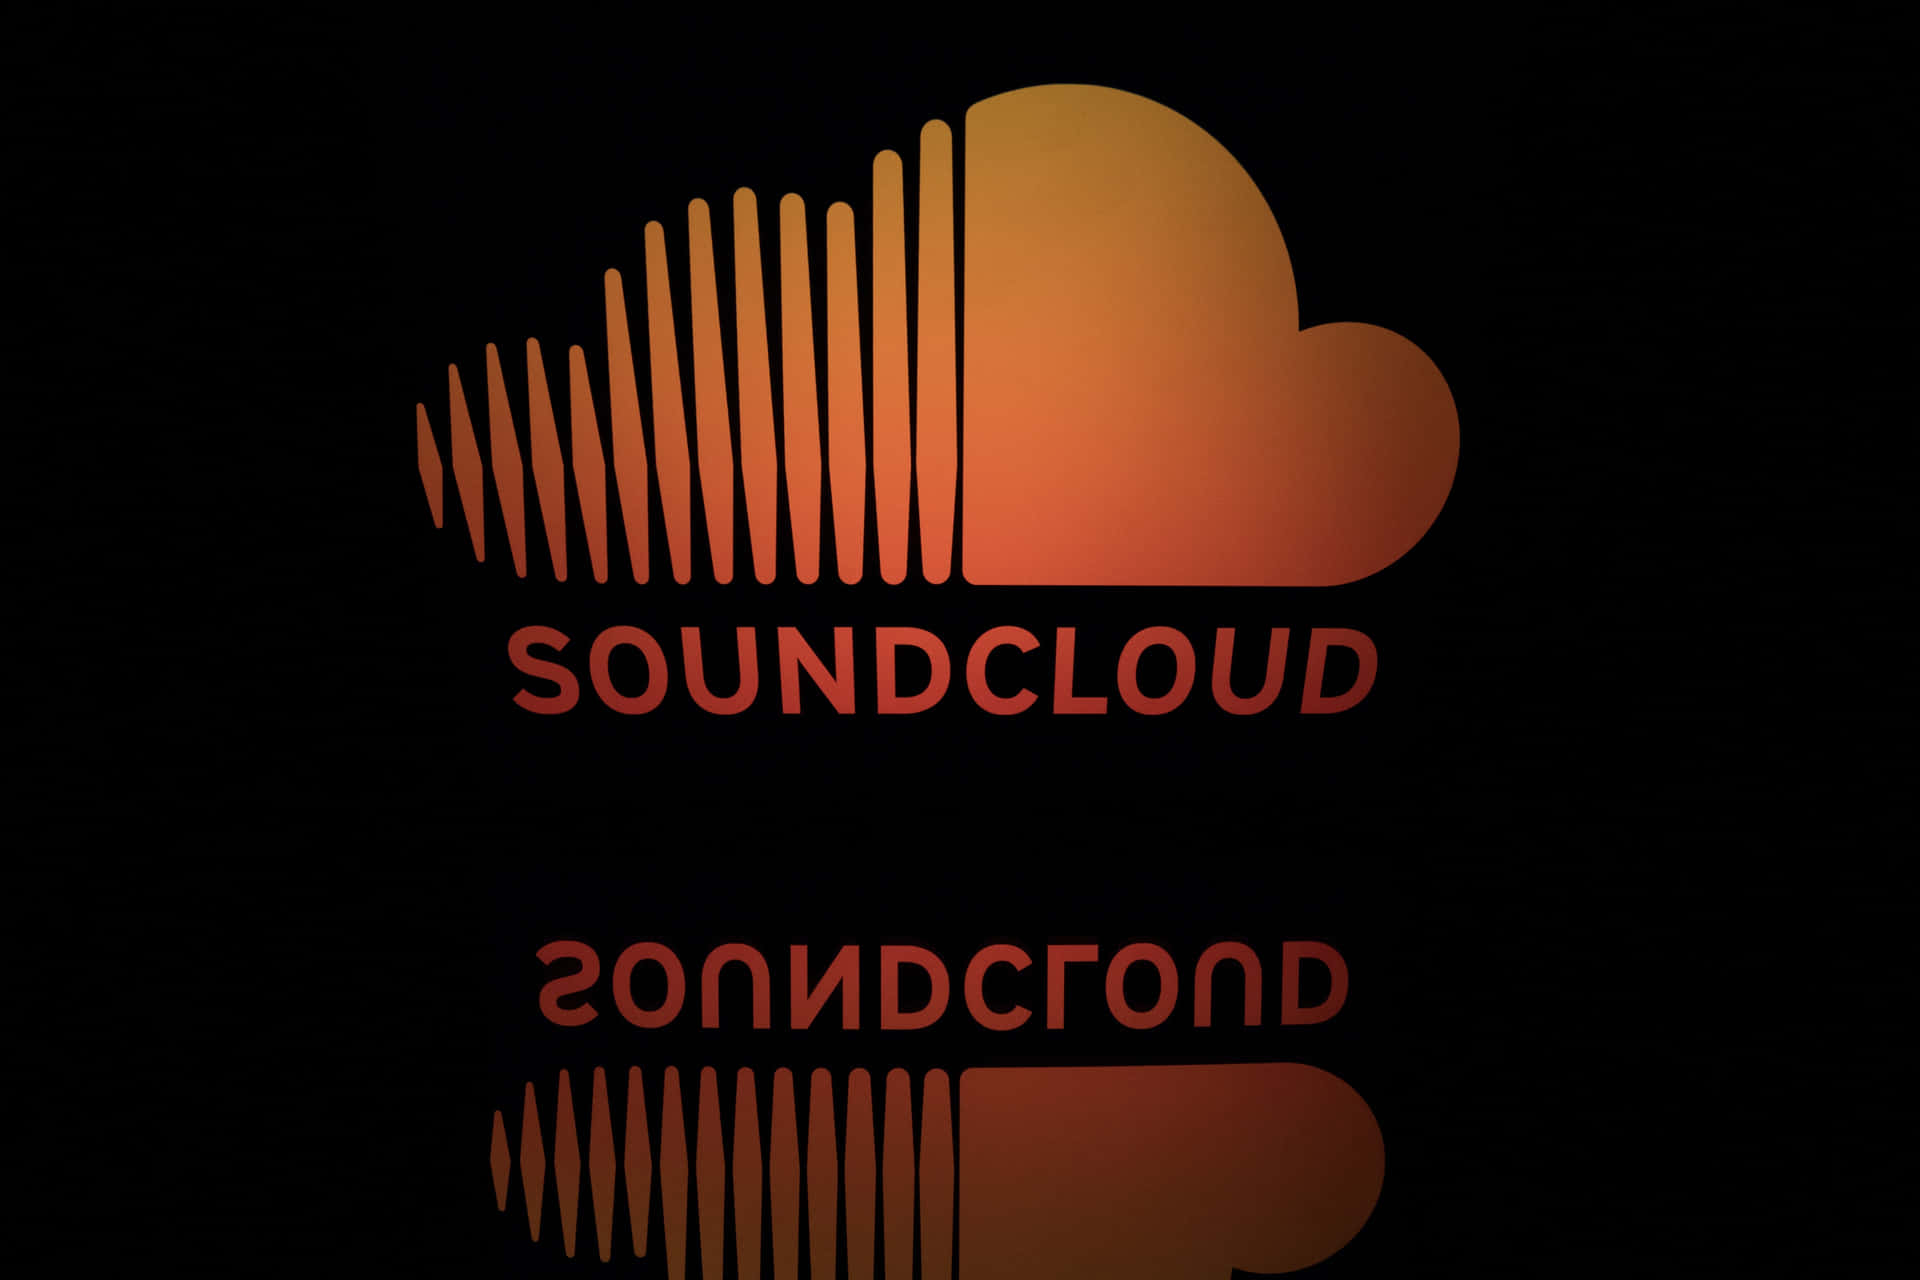 Listen to Music from the Best SoundCloud Artists